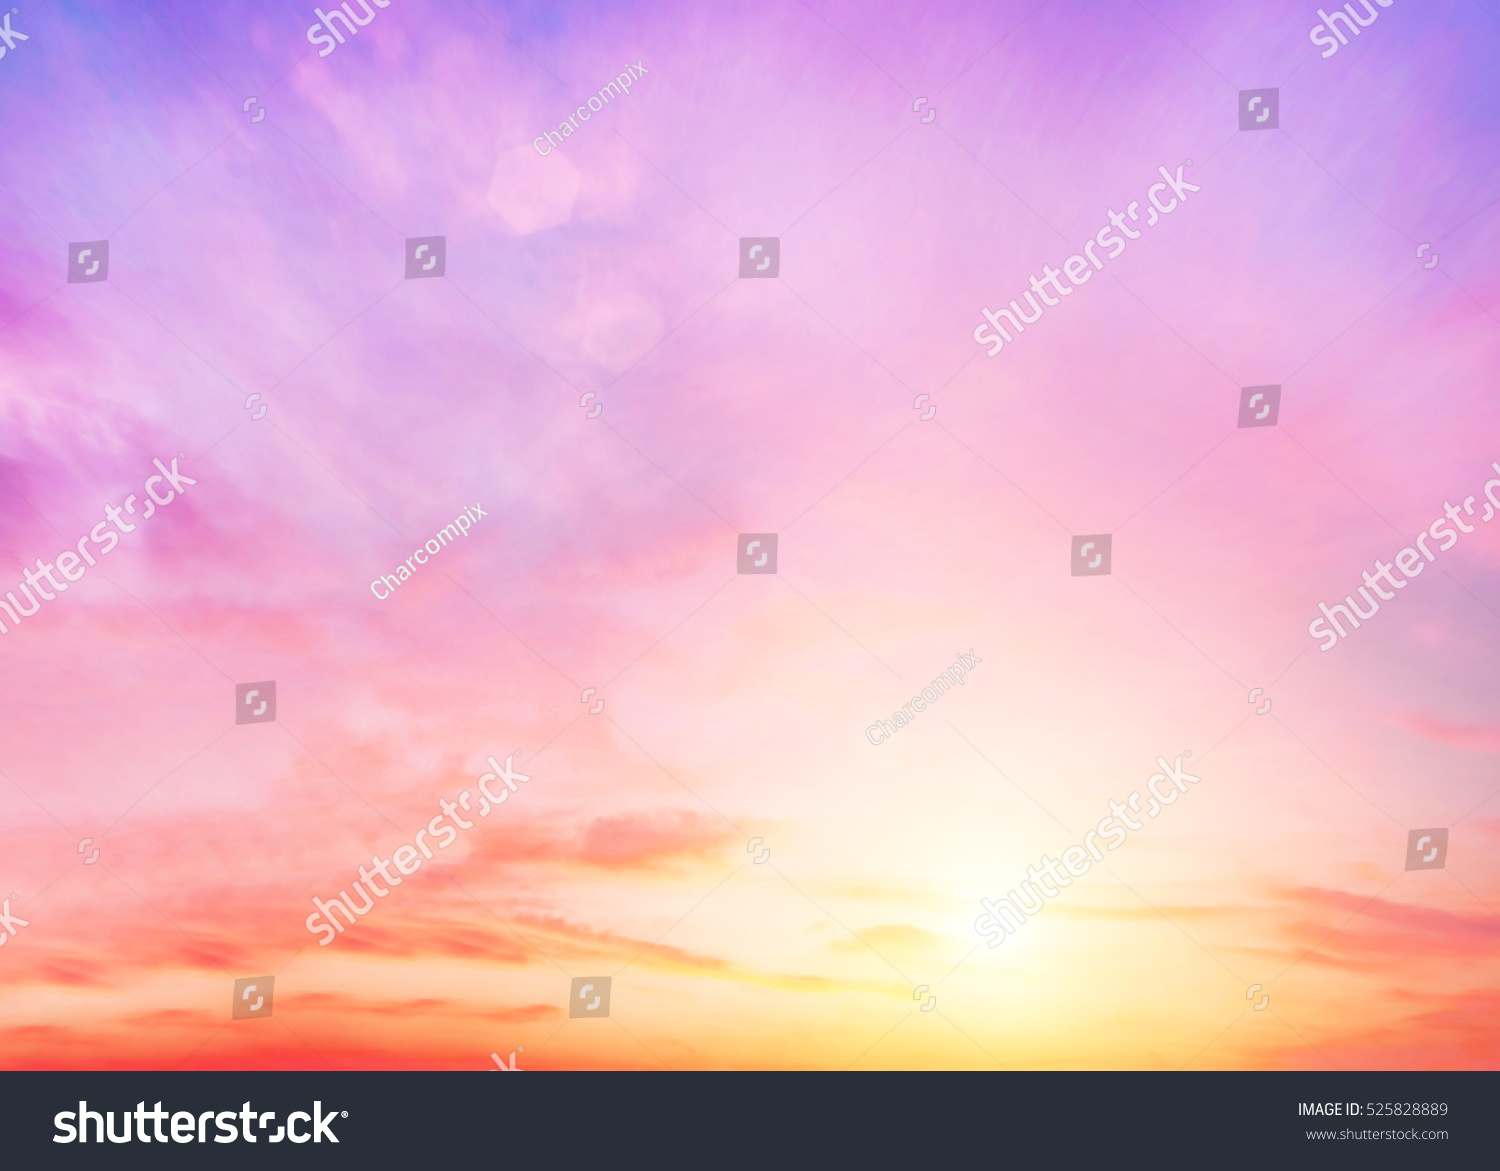 The blur pastels gradient sunset background on soft nature sunrise peaceful morning beach outdoor. heavenly mind view at a resort deck touching sunshine, sky summer clouds. #525828889